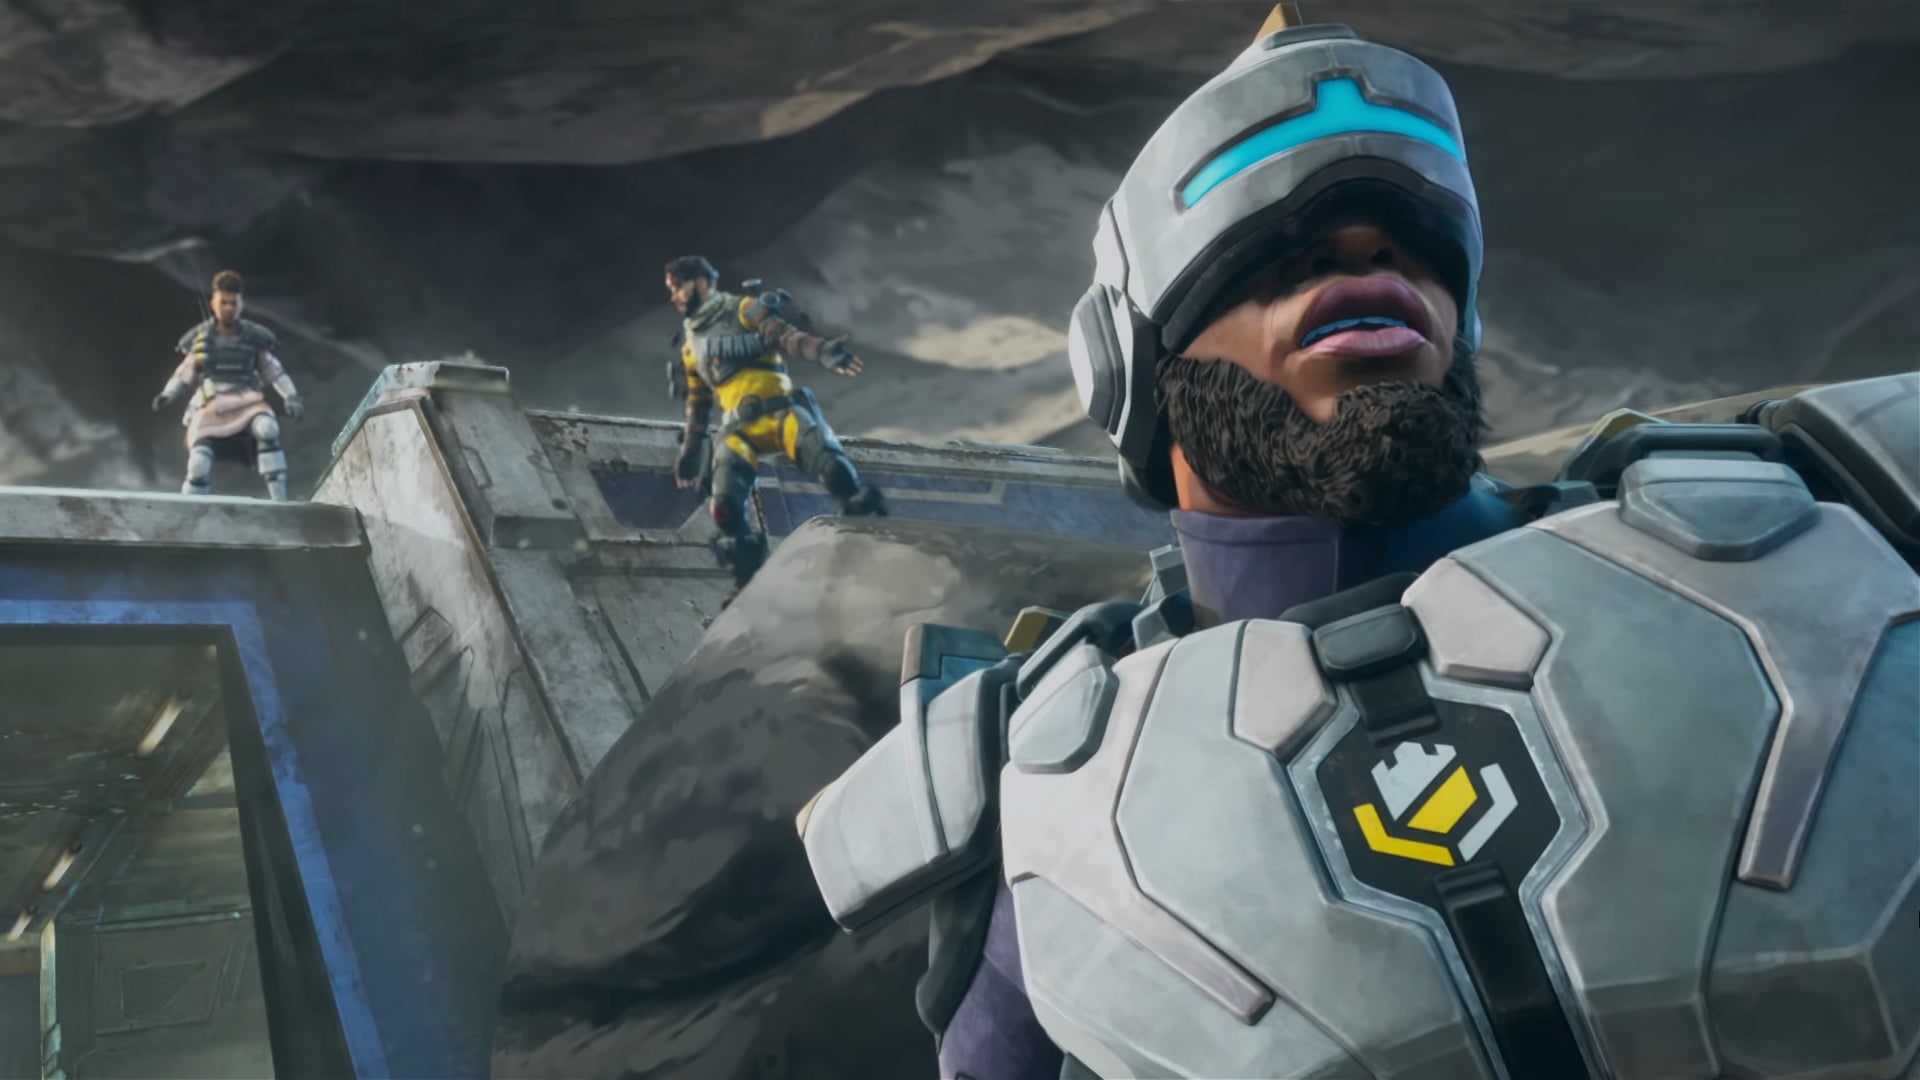 A still image from the Apex Legends Season 13 Launch Trailer, showcasing Newcastle standing in the foreground with his teammates, Mirage and Bangalore, in the background above him.